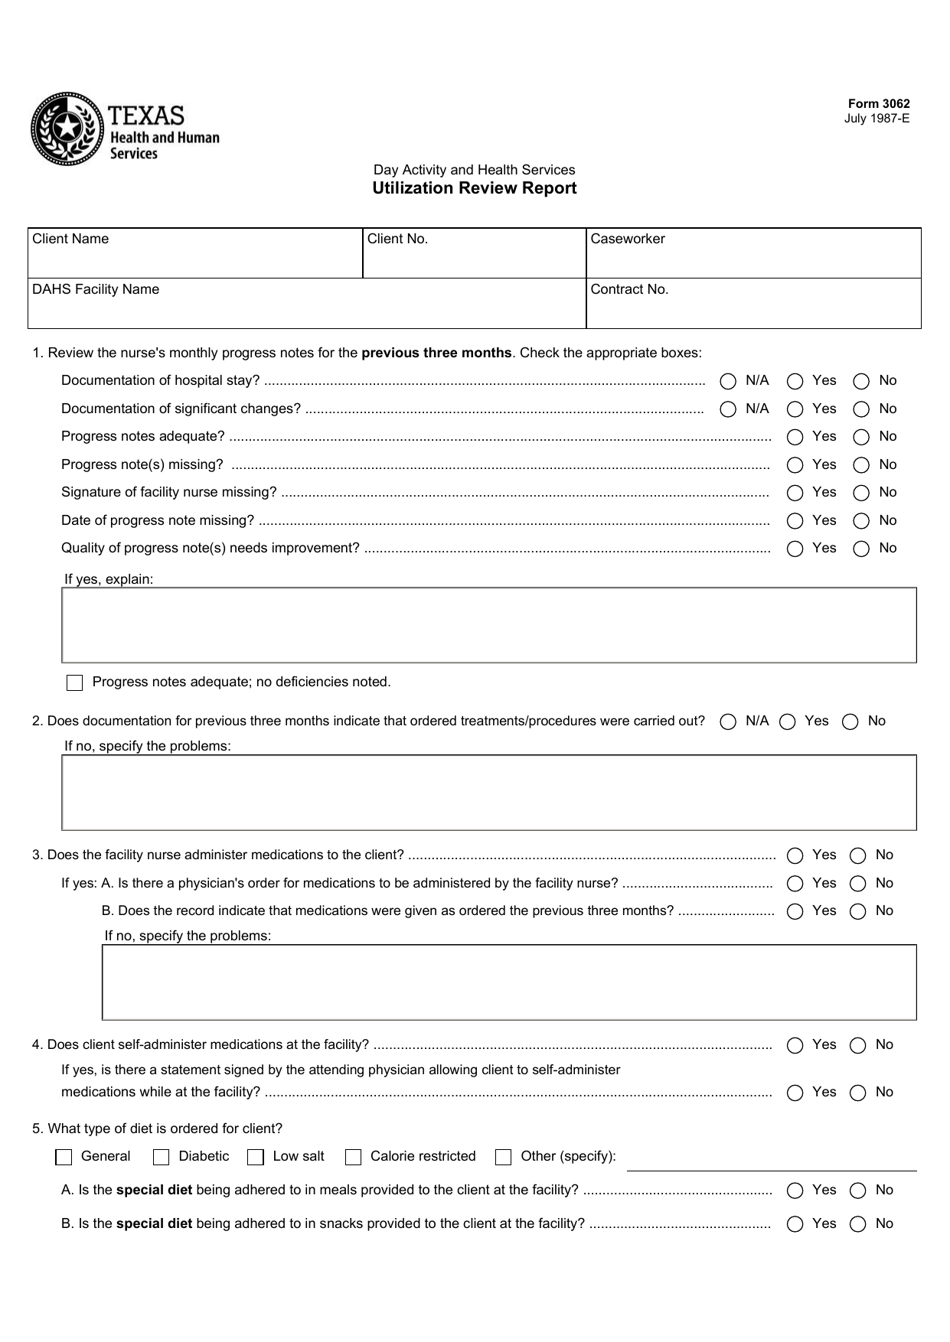 Form 3062 Day Activity and Health Services Utilization Review Report - Texas, Page 1